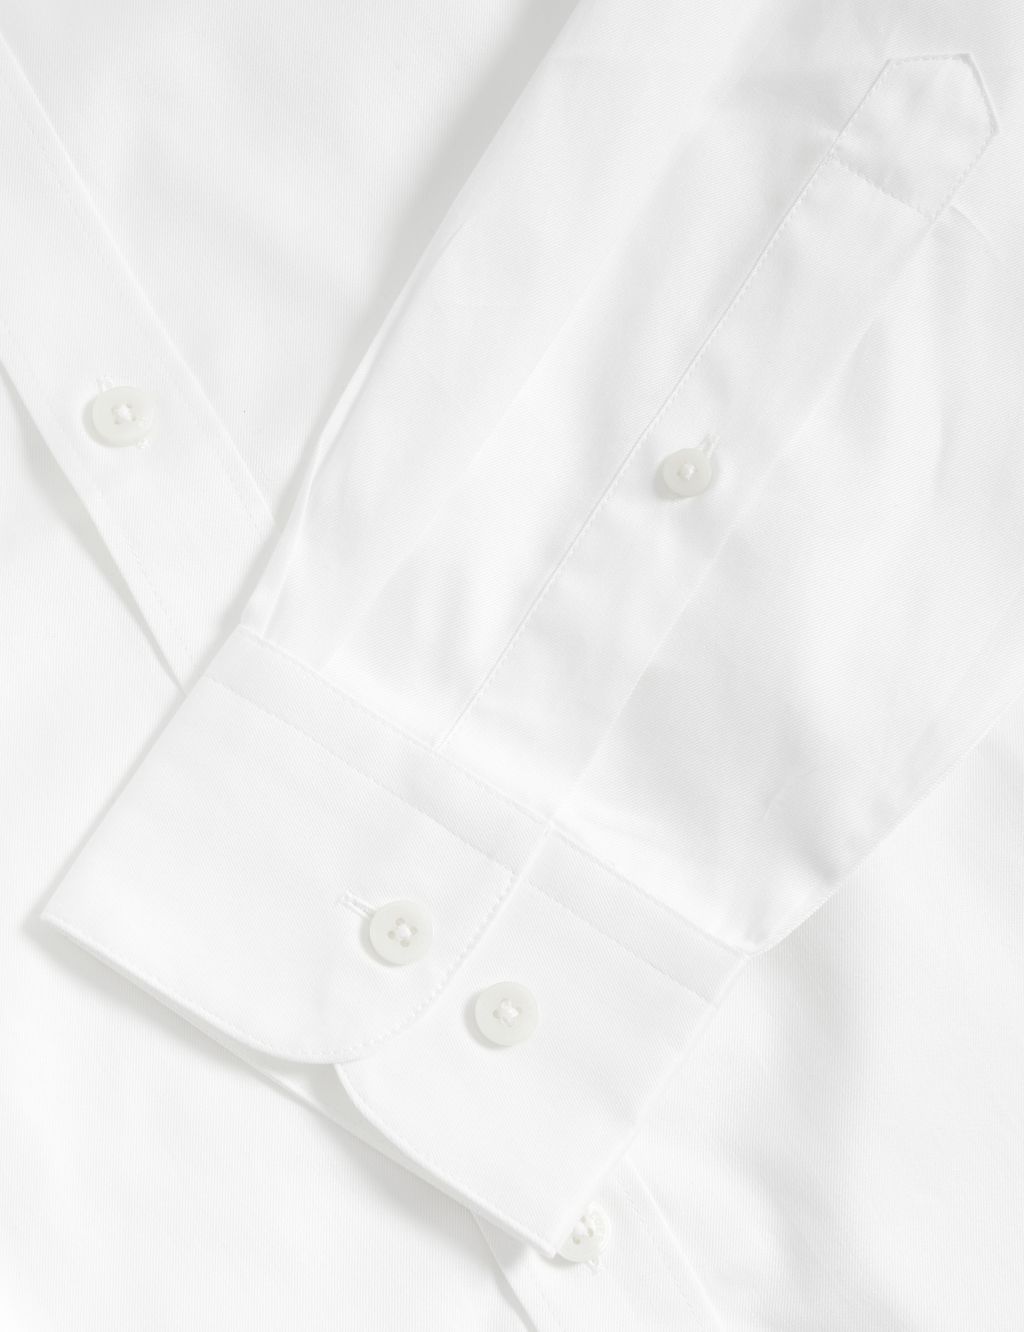 Tailored Fit Pure Cotton Twill Shirt image 3